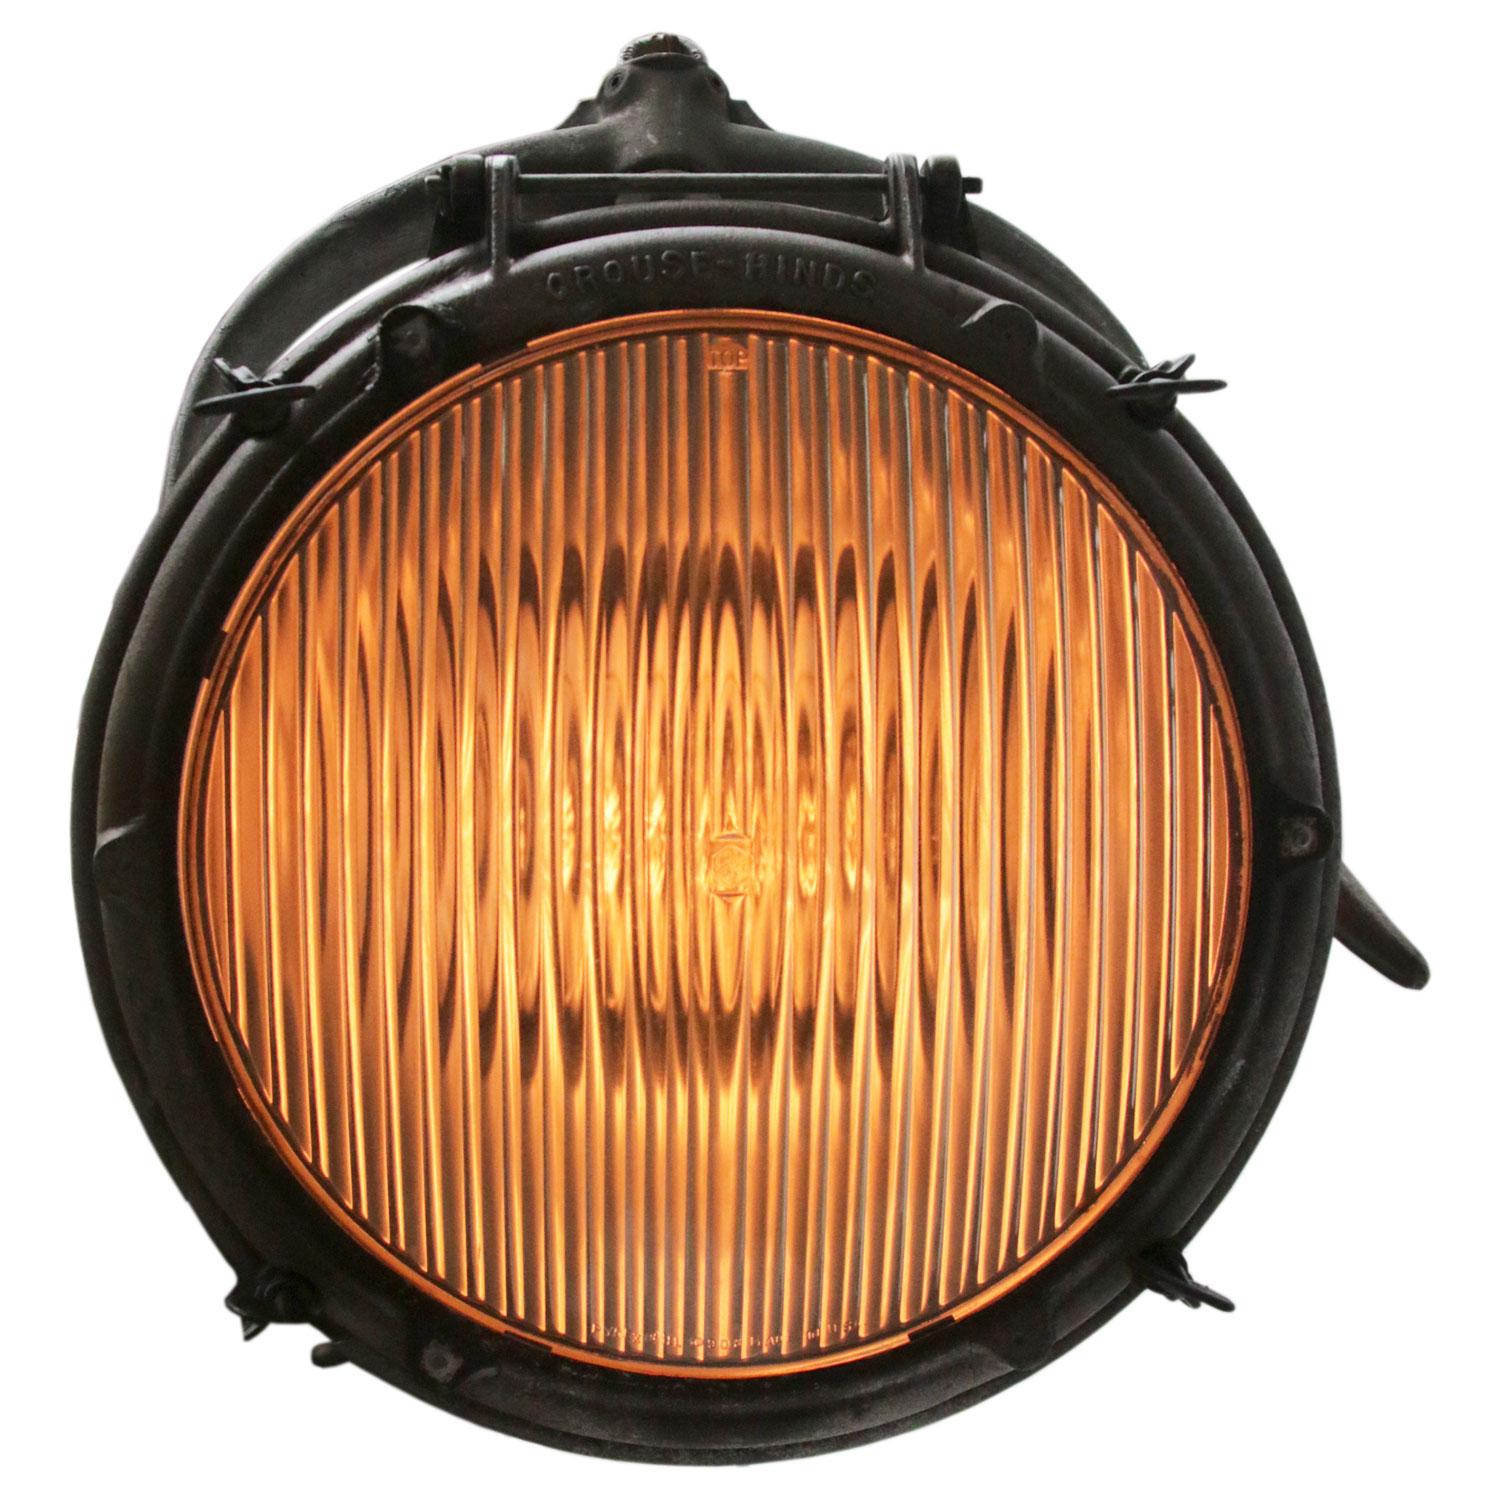 Industrial hanging light crouse-hinds spot, USA.
Cast aluminium with striped glass. Measures: Diameter 33. 5 cm.

Weight 12.5 kg / 27.6 lb

Priced per individual item. All lamps have been made suitable by international standards for